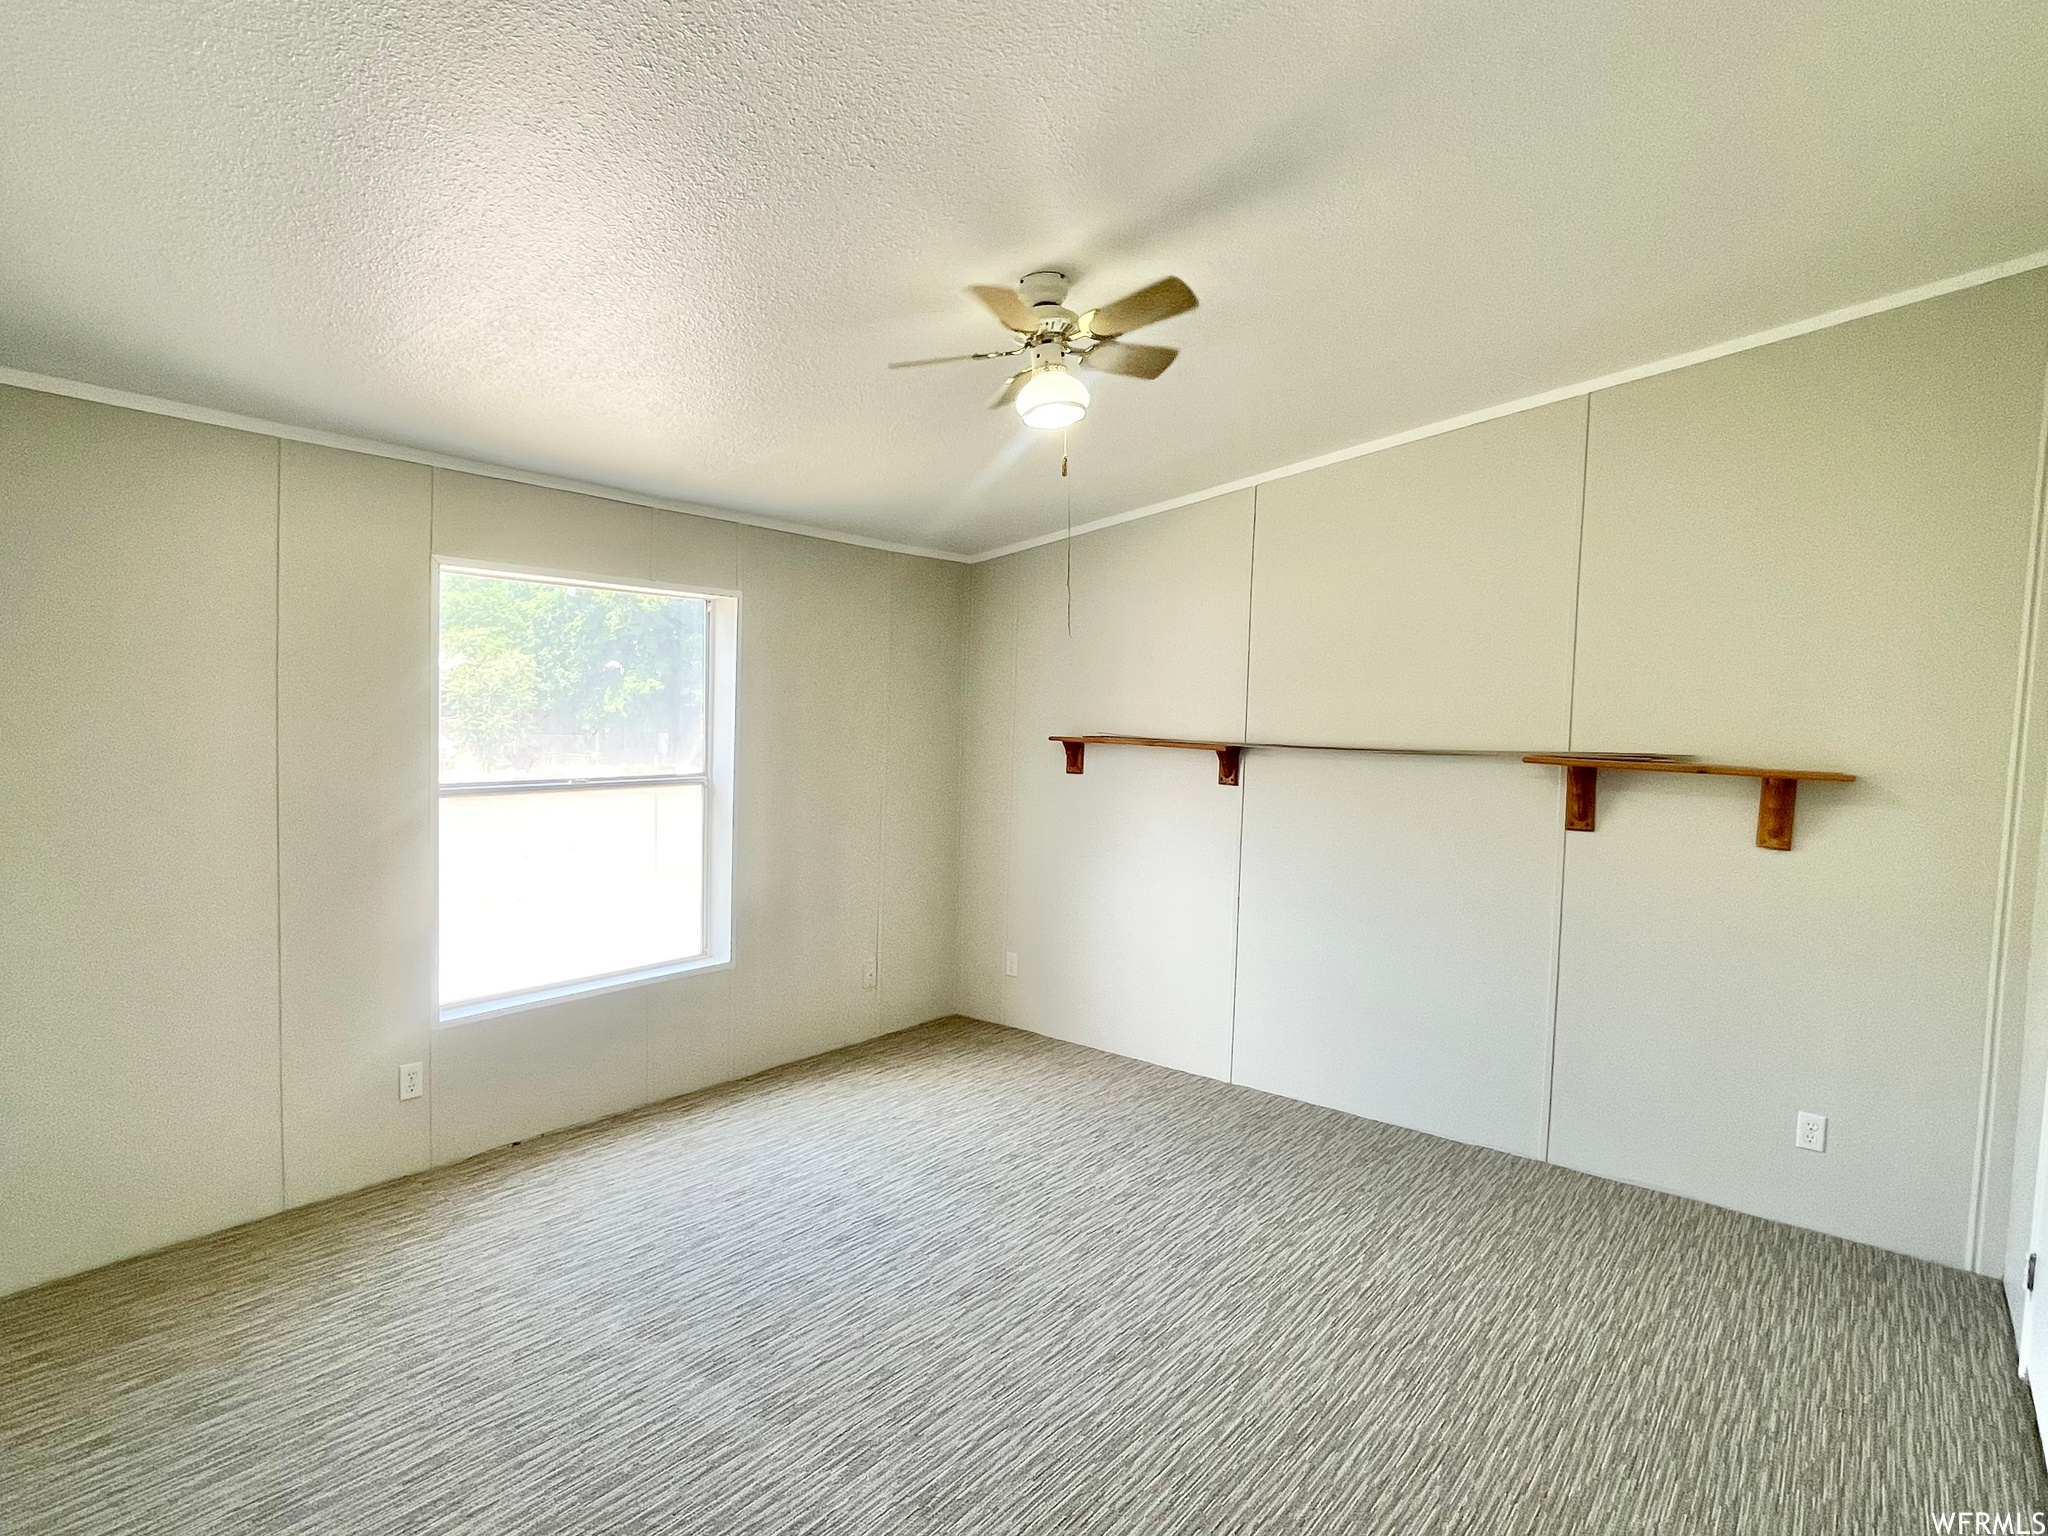 Spare room featuring lofted ceiling, a ceiling fan, carpet, and natural light